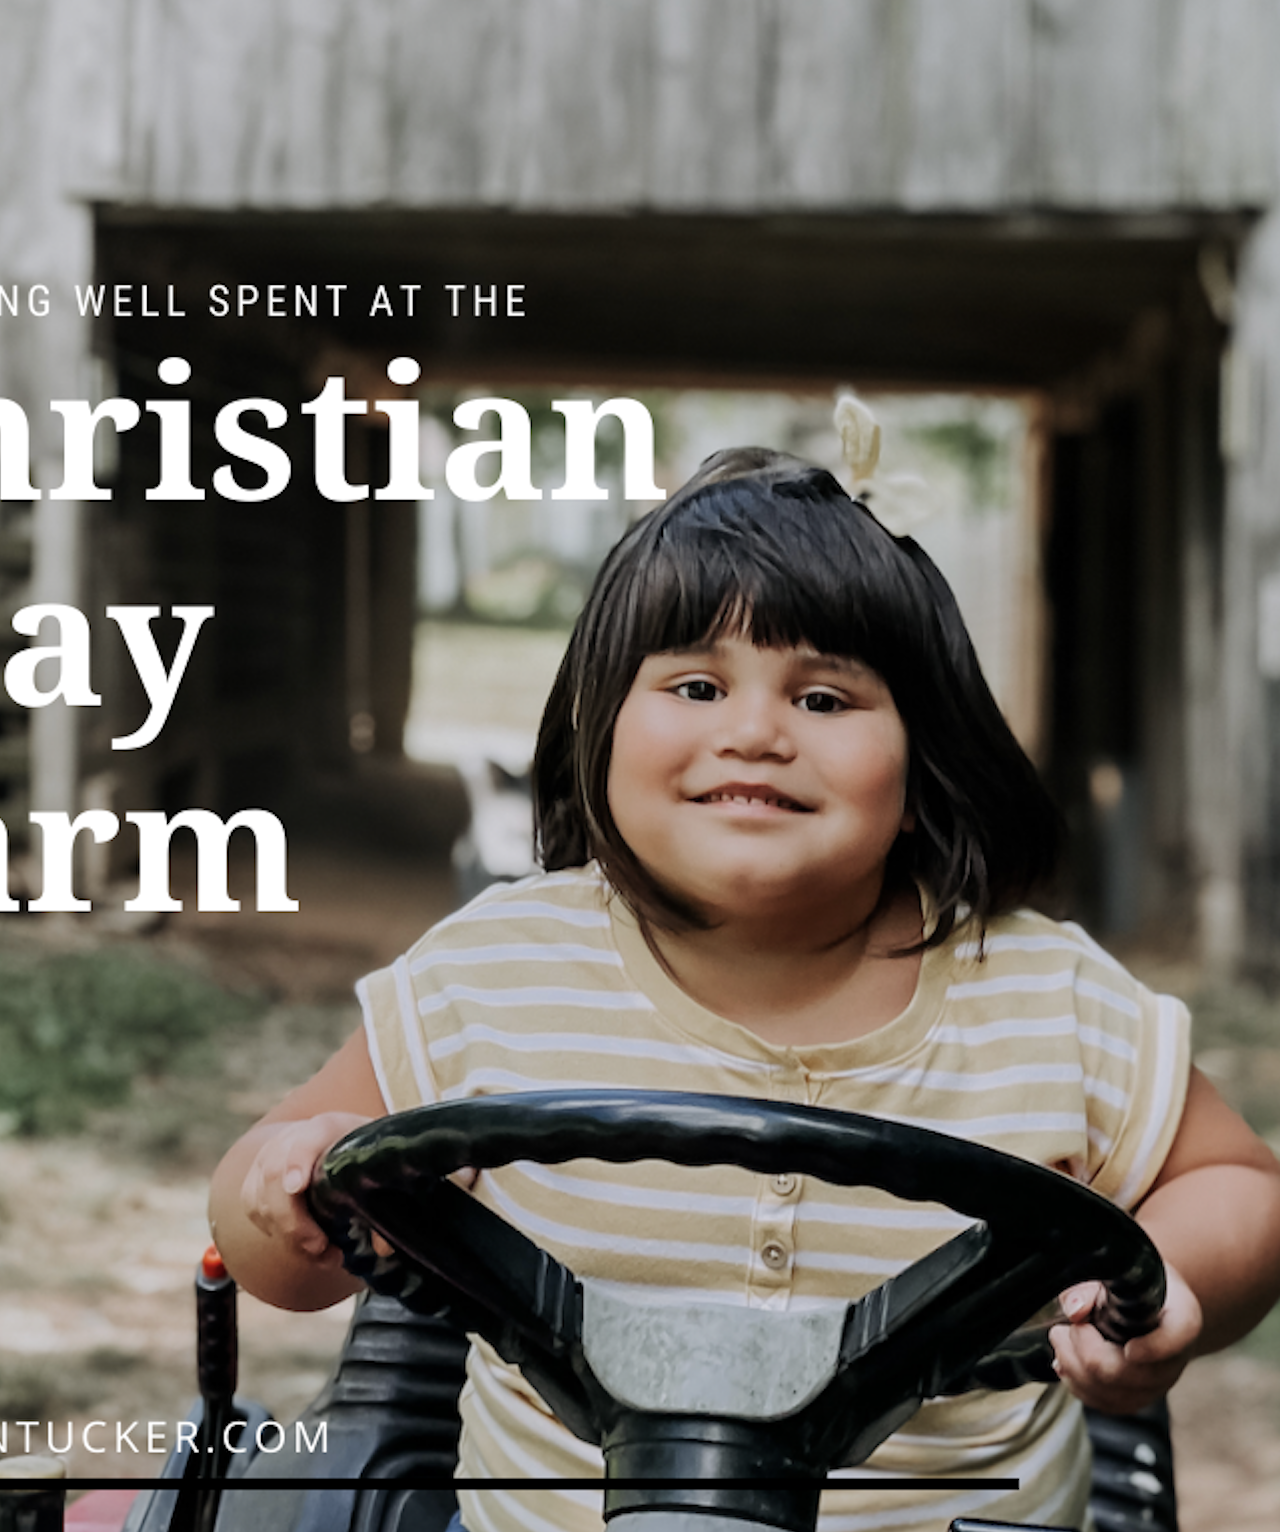 A Morning Well Spent at Christian Way Farm {review}